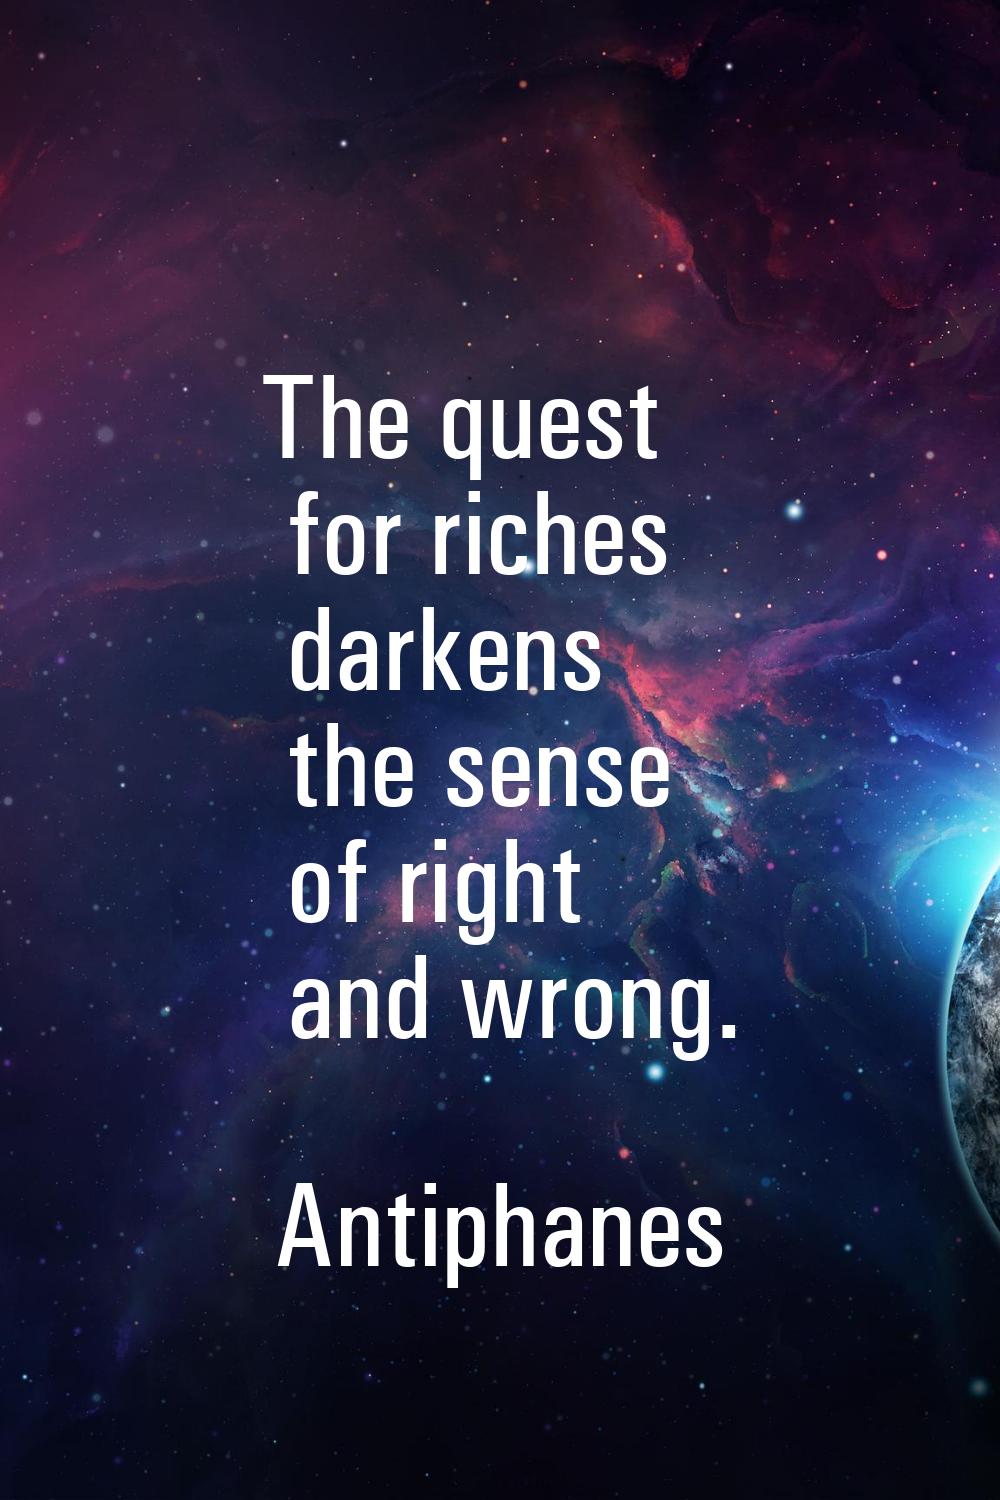 The quest for riches darkens the sense of right and wrong.